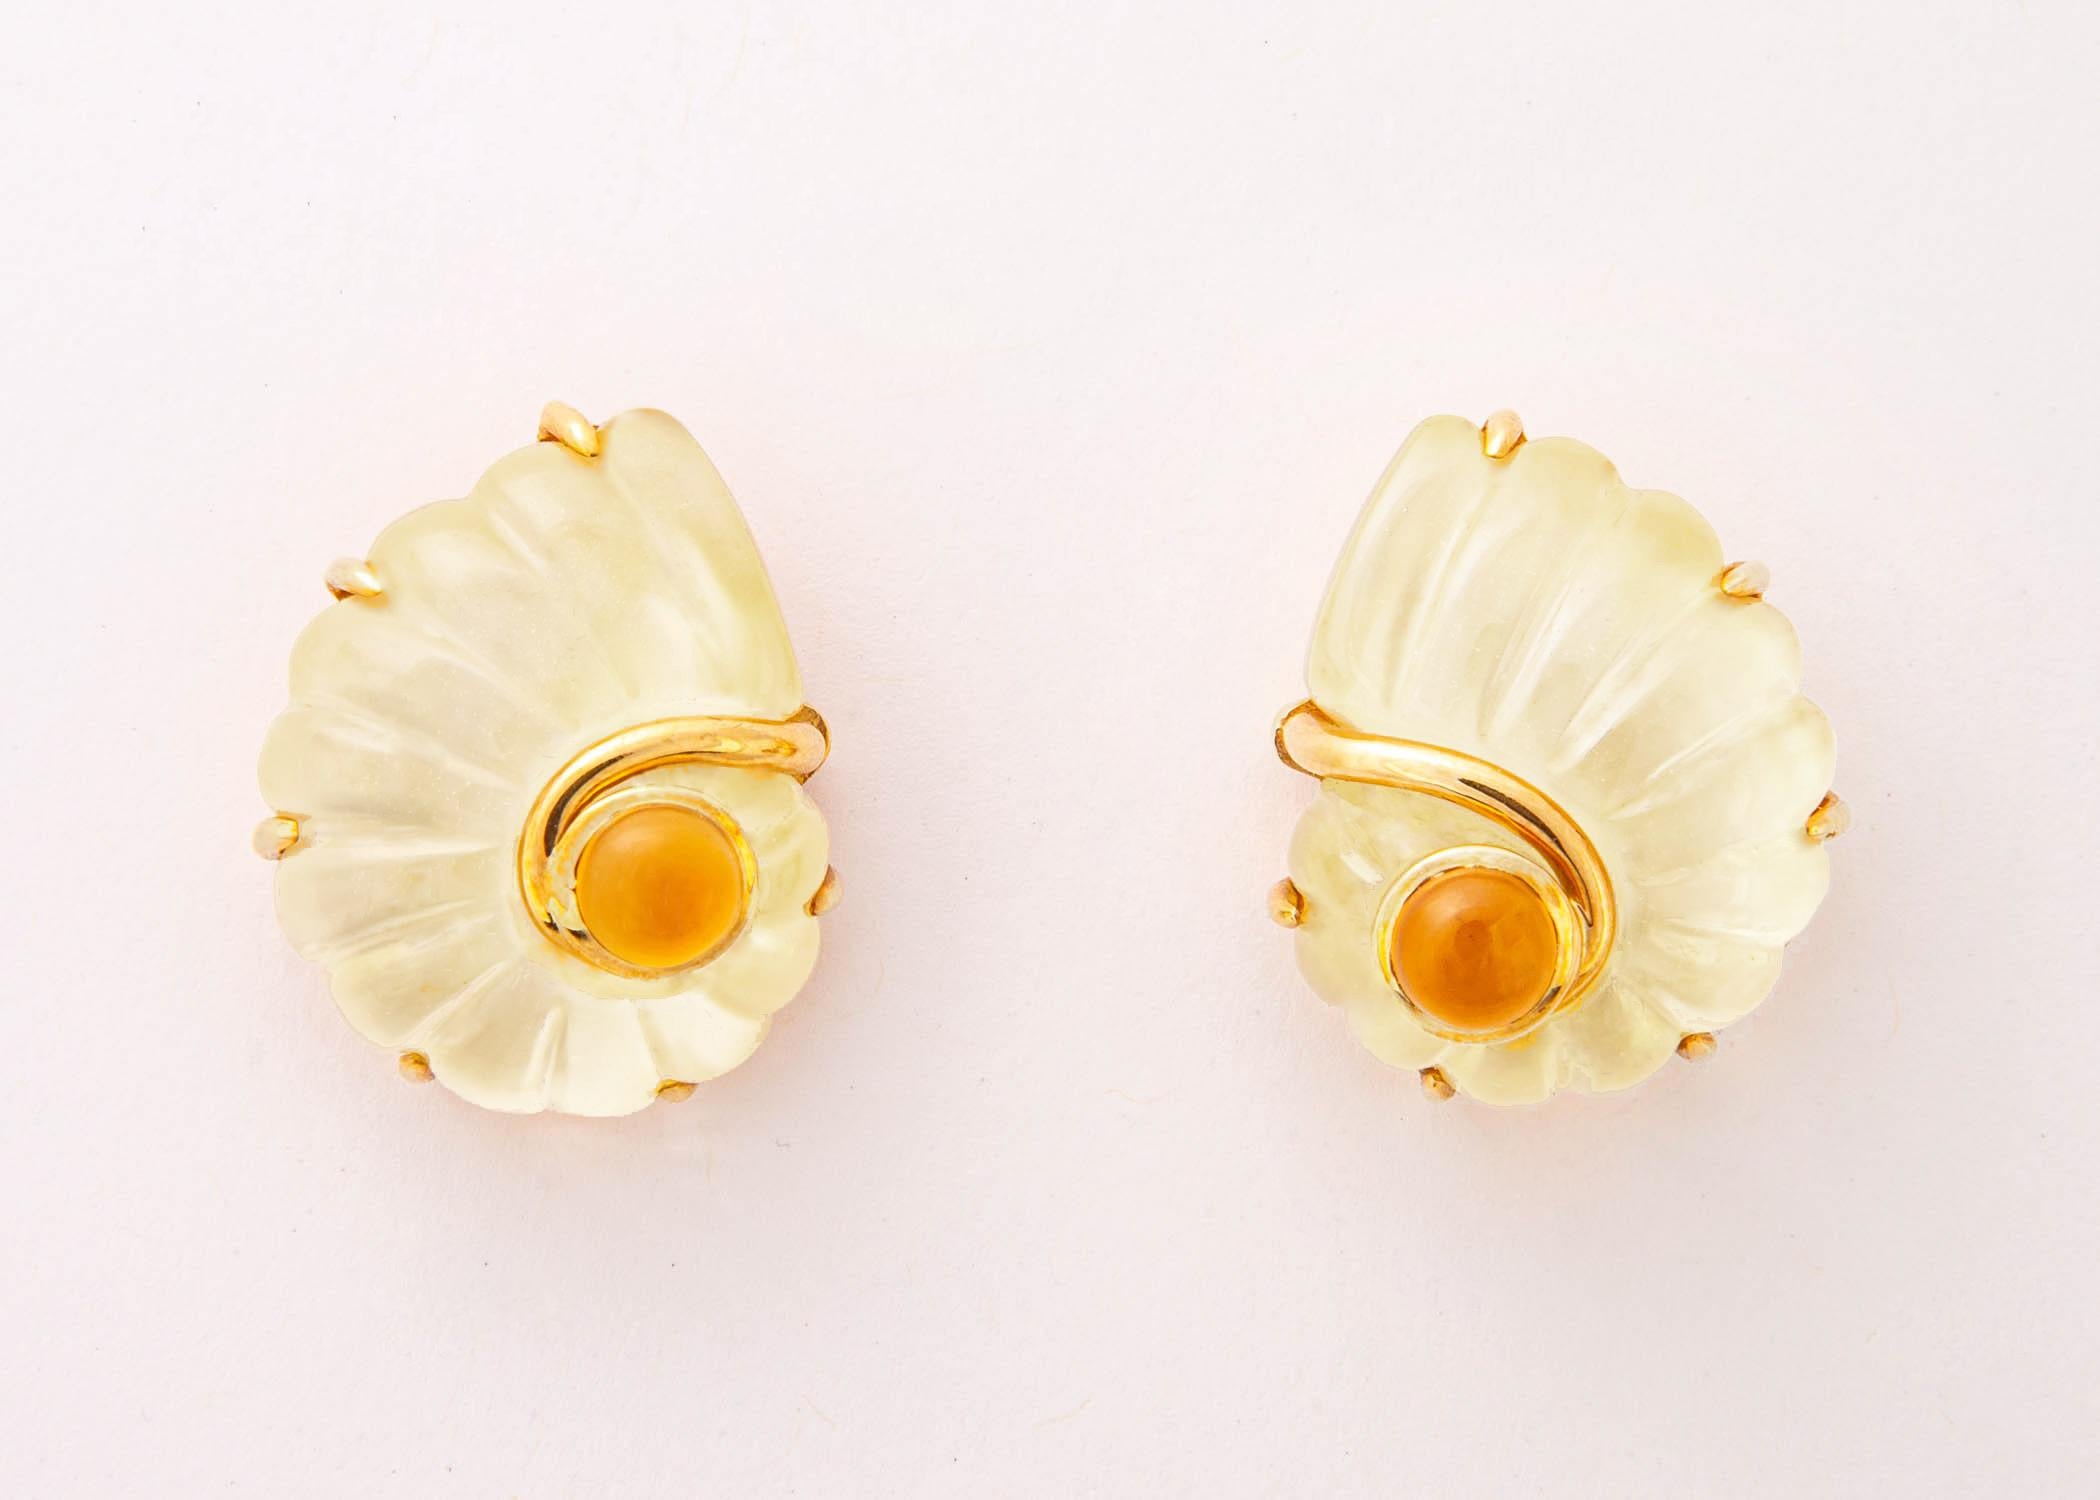 Contemporary Trianon Rock Crystal, Citrine and Mother of Pearl Earrings